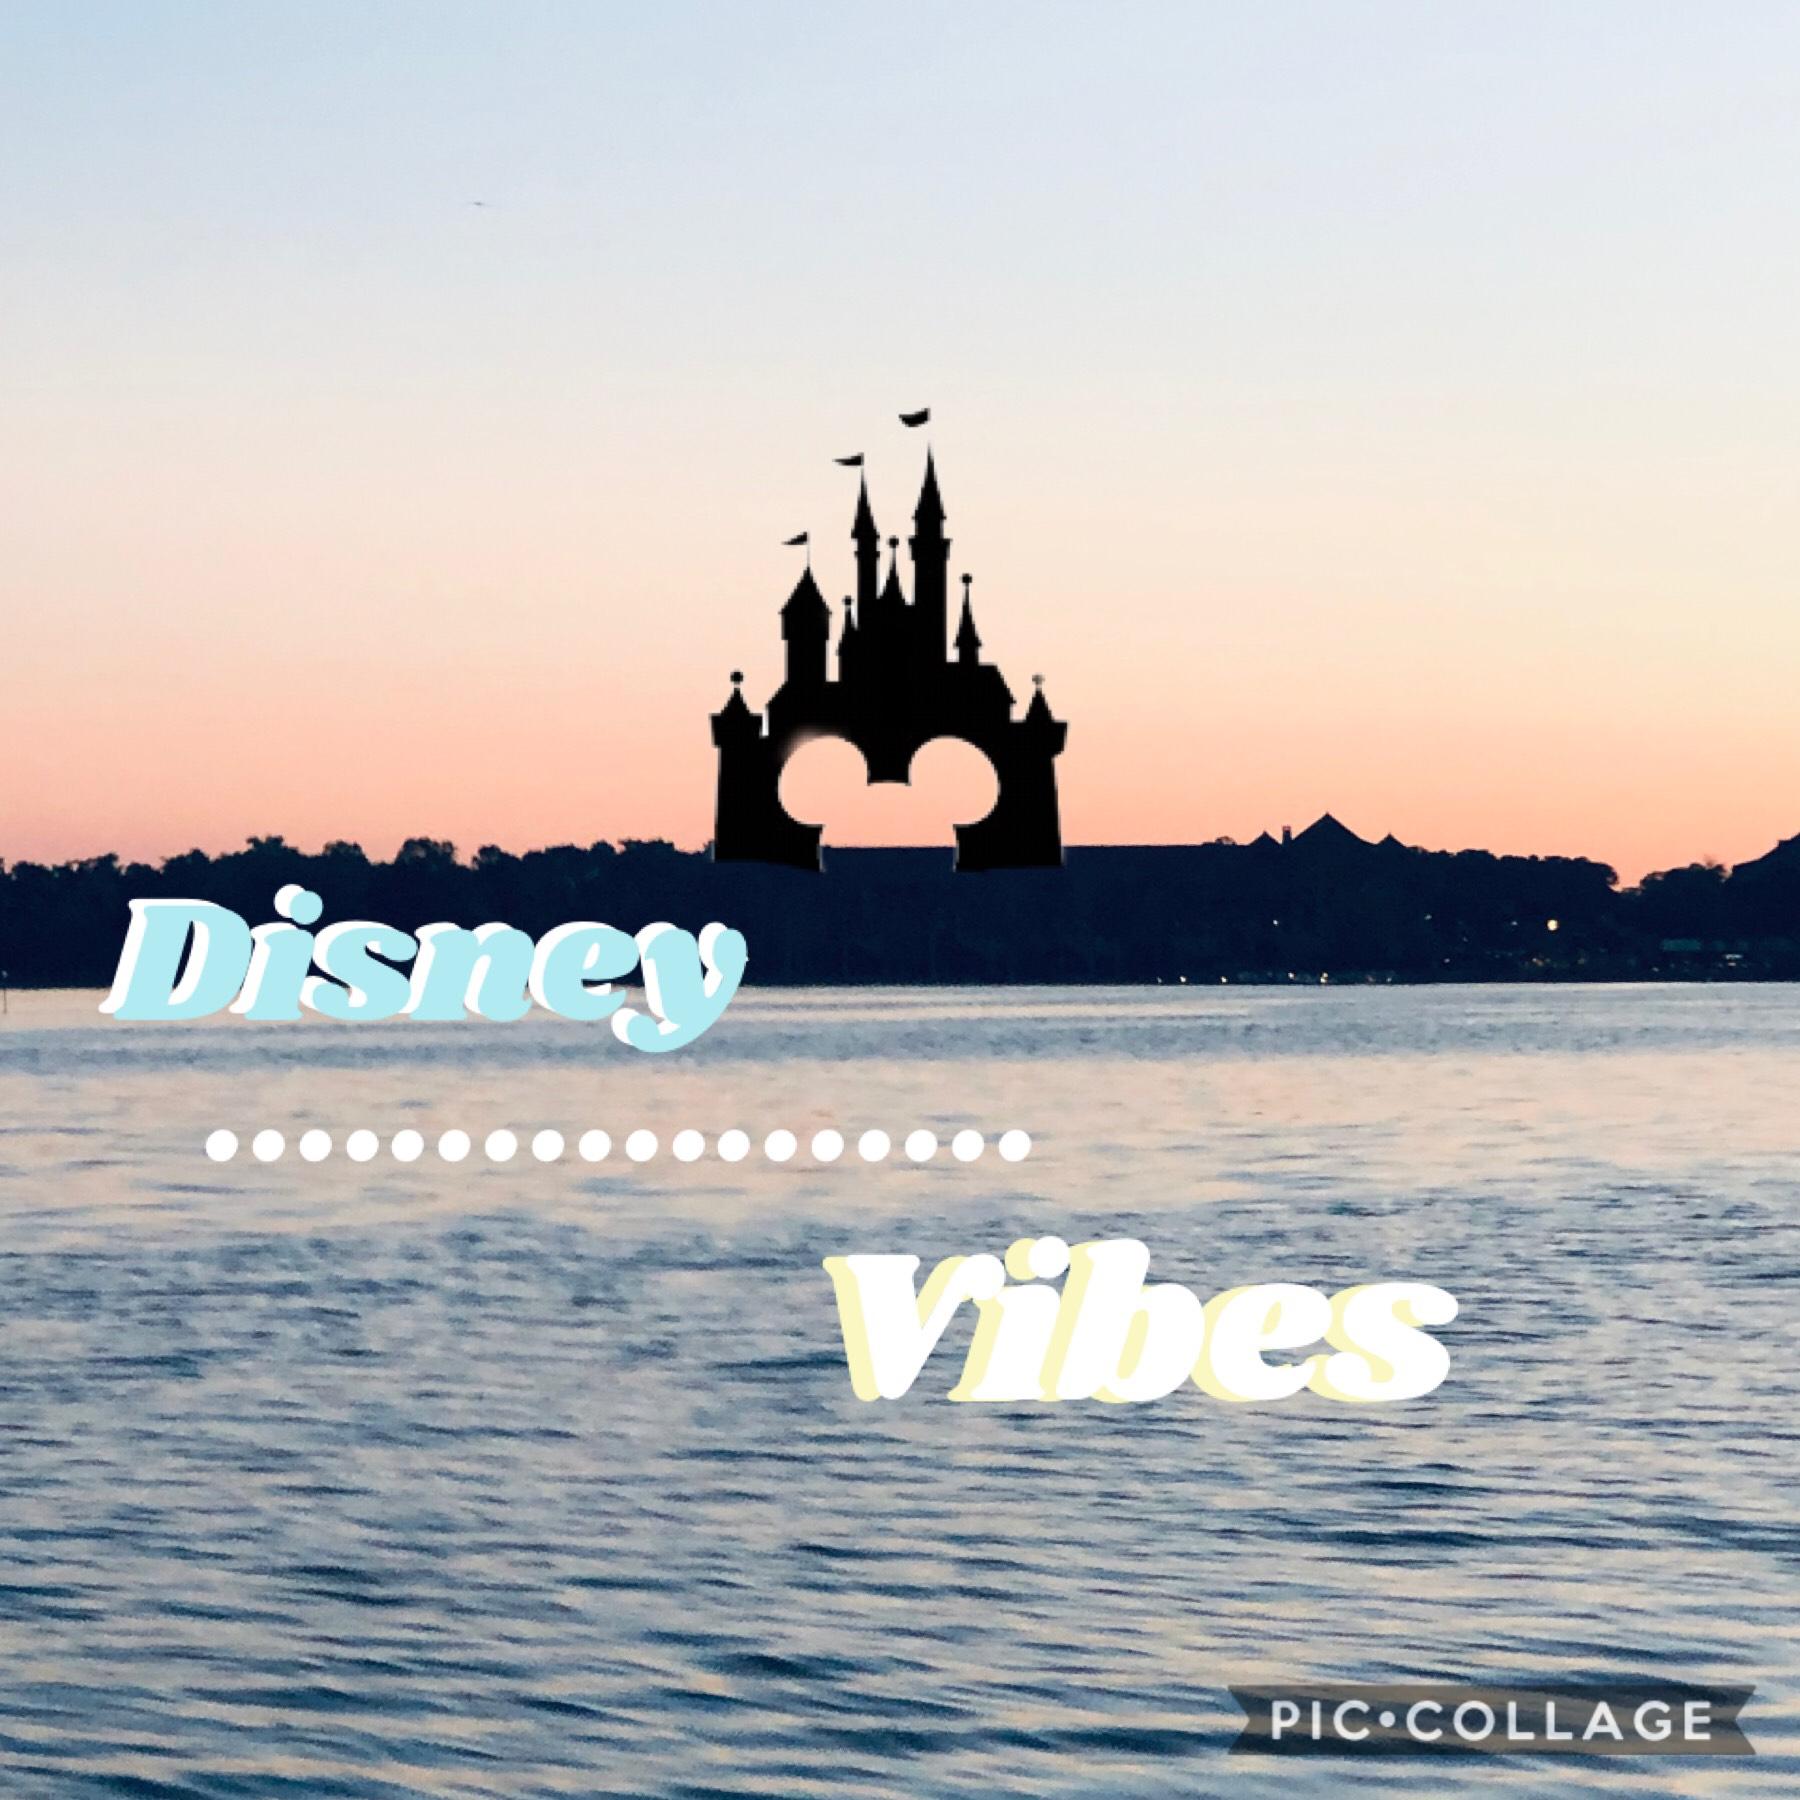 I took this picture- did the edits, and love how it came out! This photo was taken by me in the Disney Resort on a boat during sunset. Sadly I’m home now but had a great vacation!